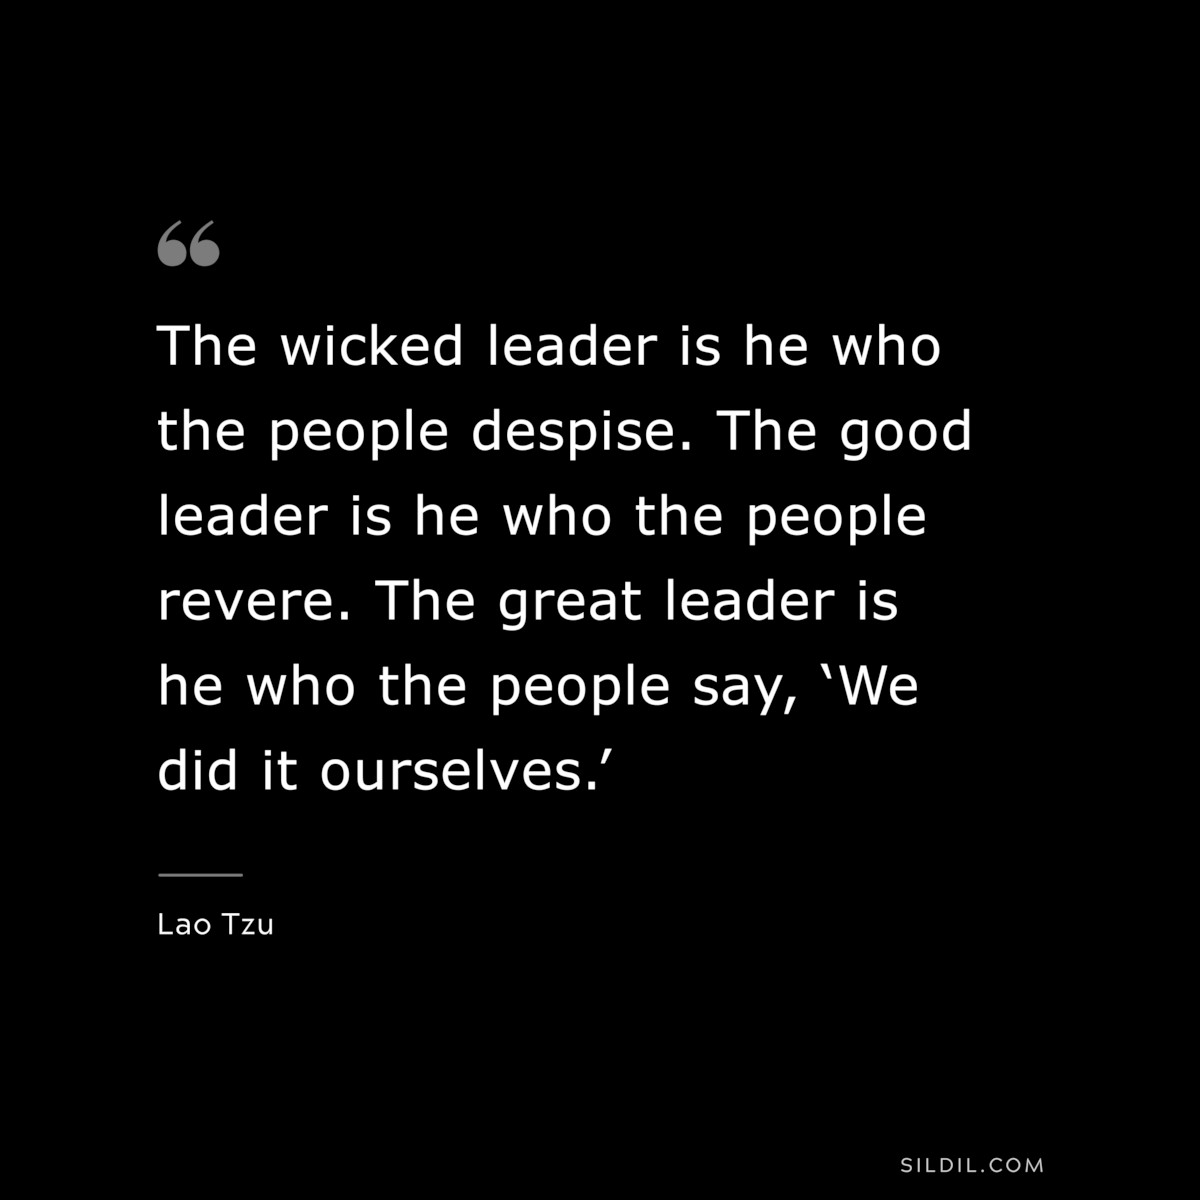 The wicked leader is he who the people despise. The good leader is he who the people revere. The great leader is he who the people say, ‘We did it ourselves.’ ― Lao Tzu